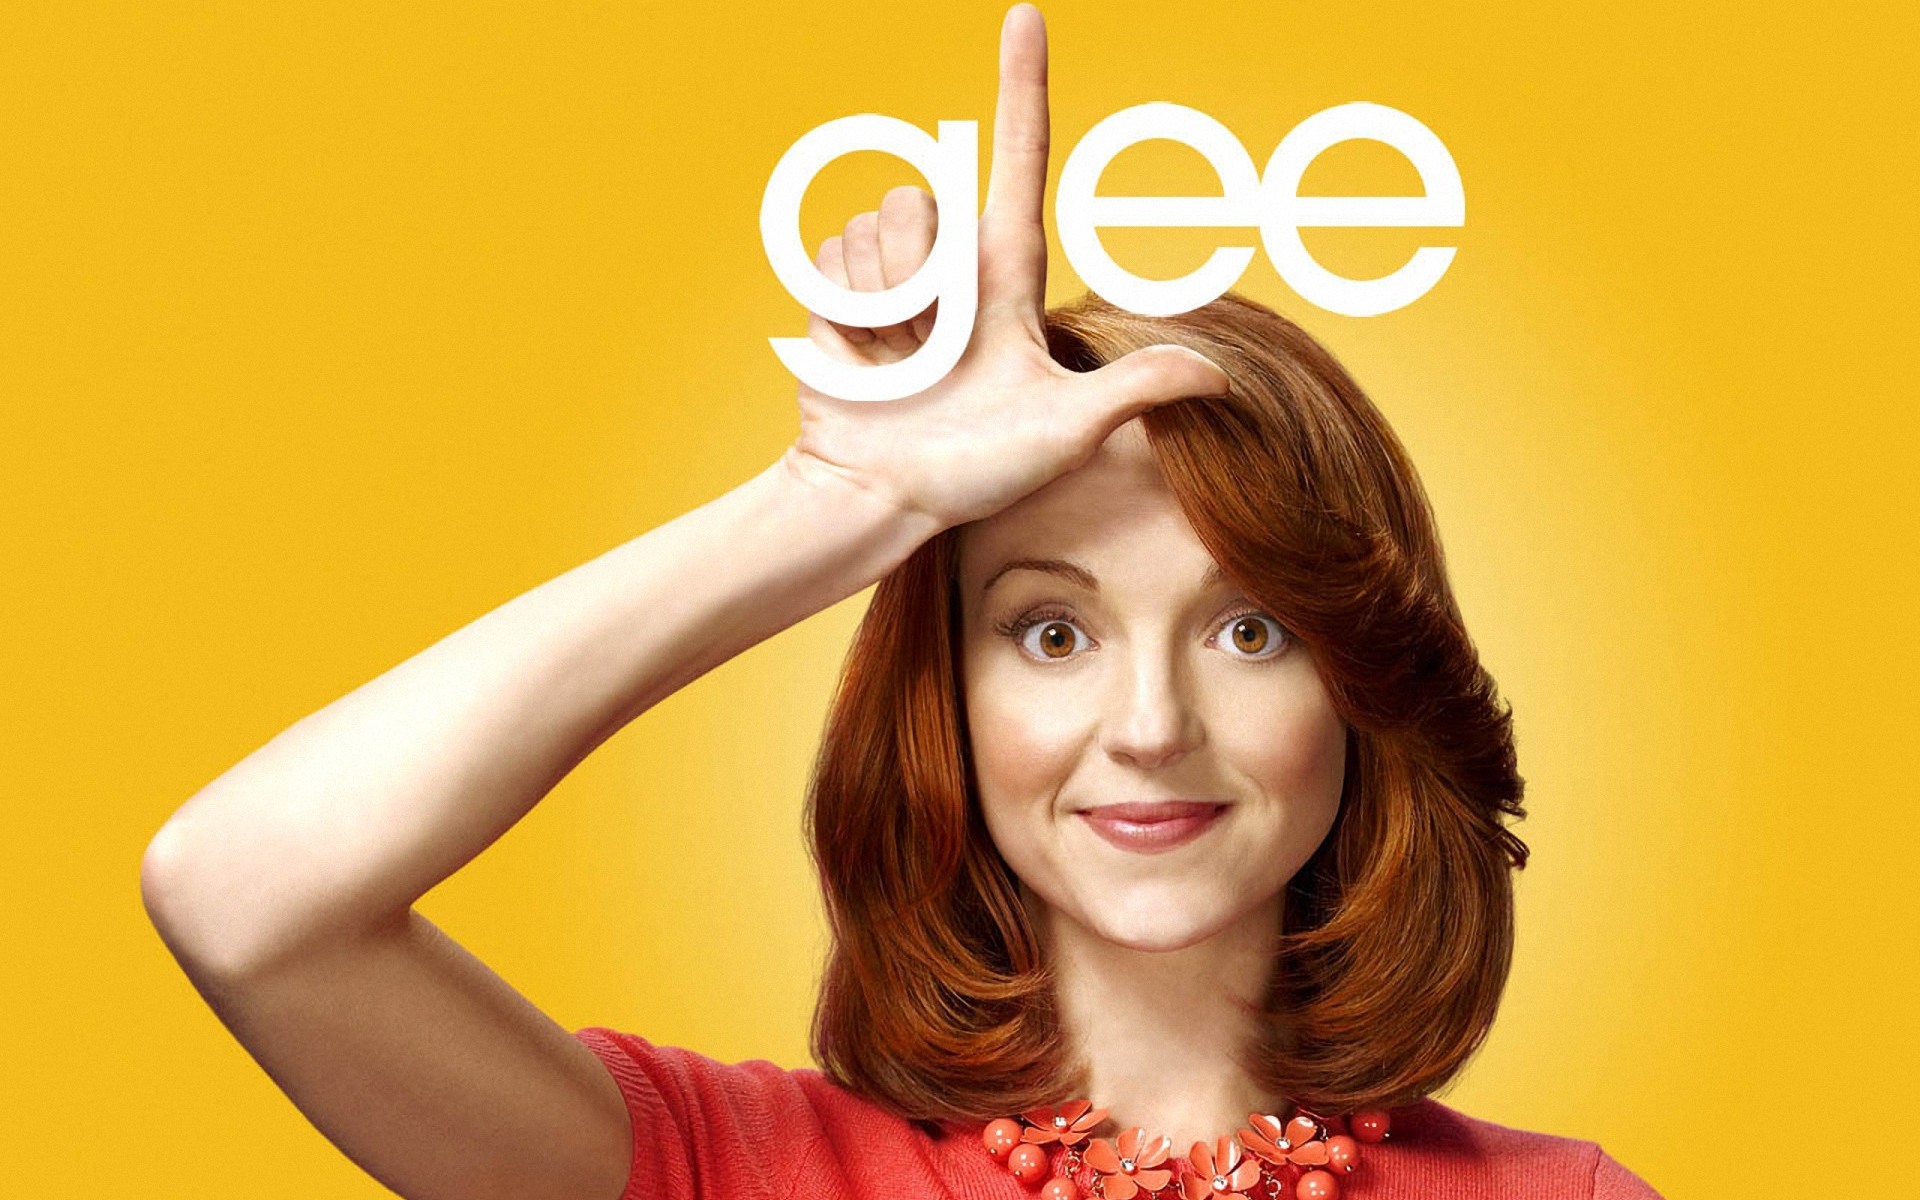 Jayma Mays Glee Wallpaper Pictures